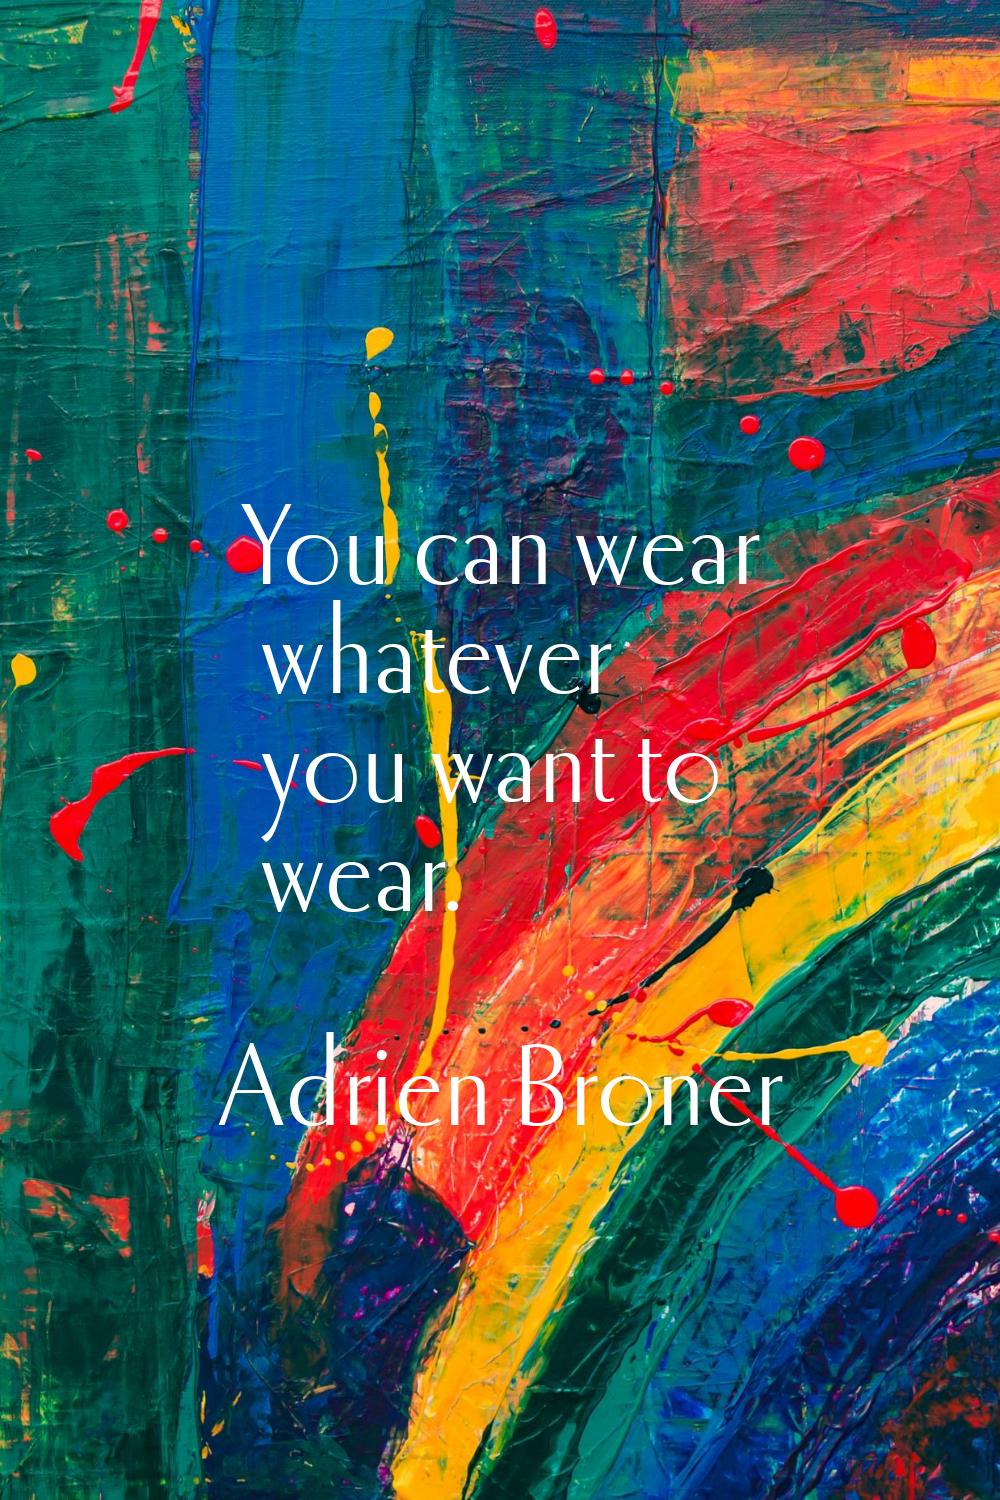 You can wear whatever you want to wear.